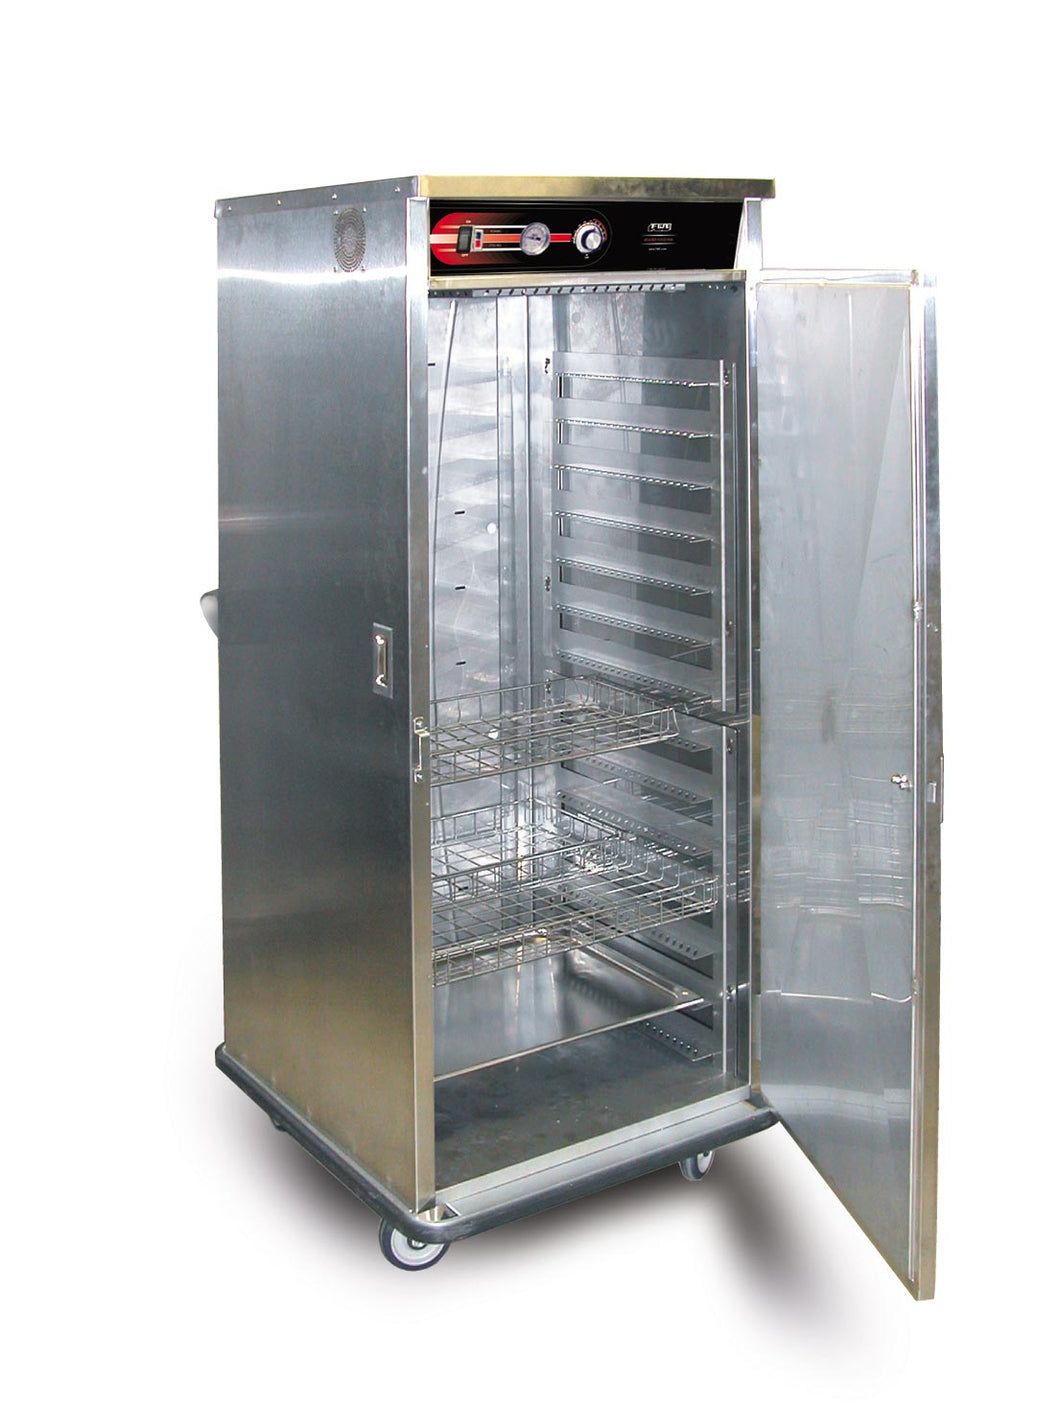 High capacity heated holding cabinet to compliment your speed-line operation - UHST-28-B